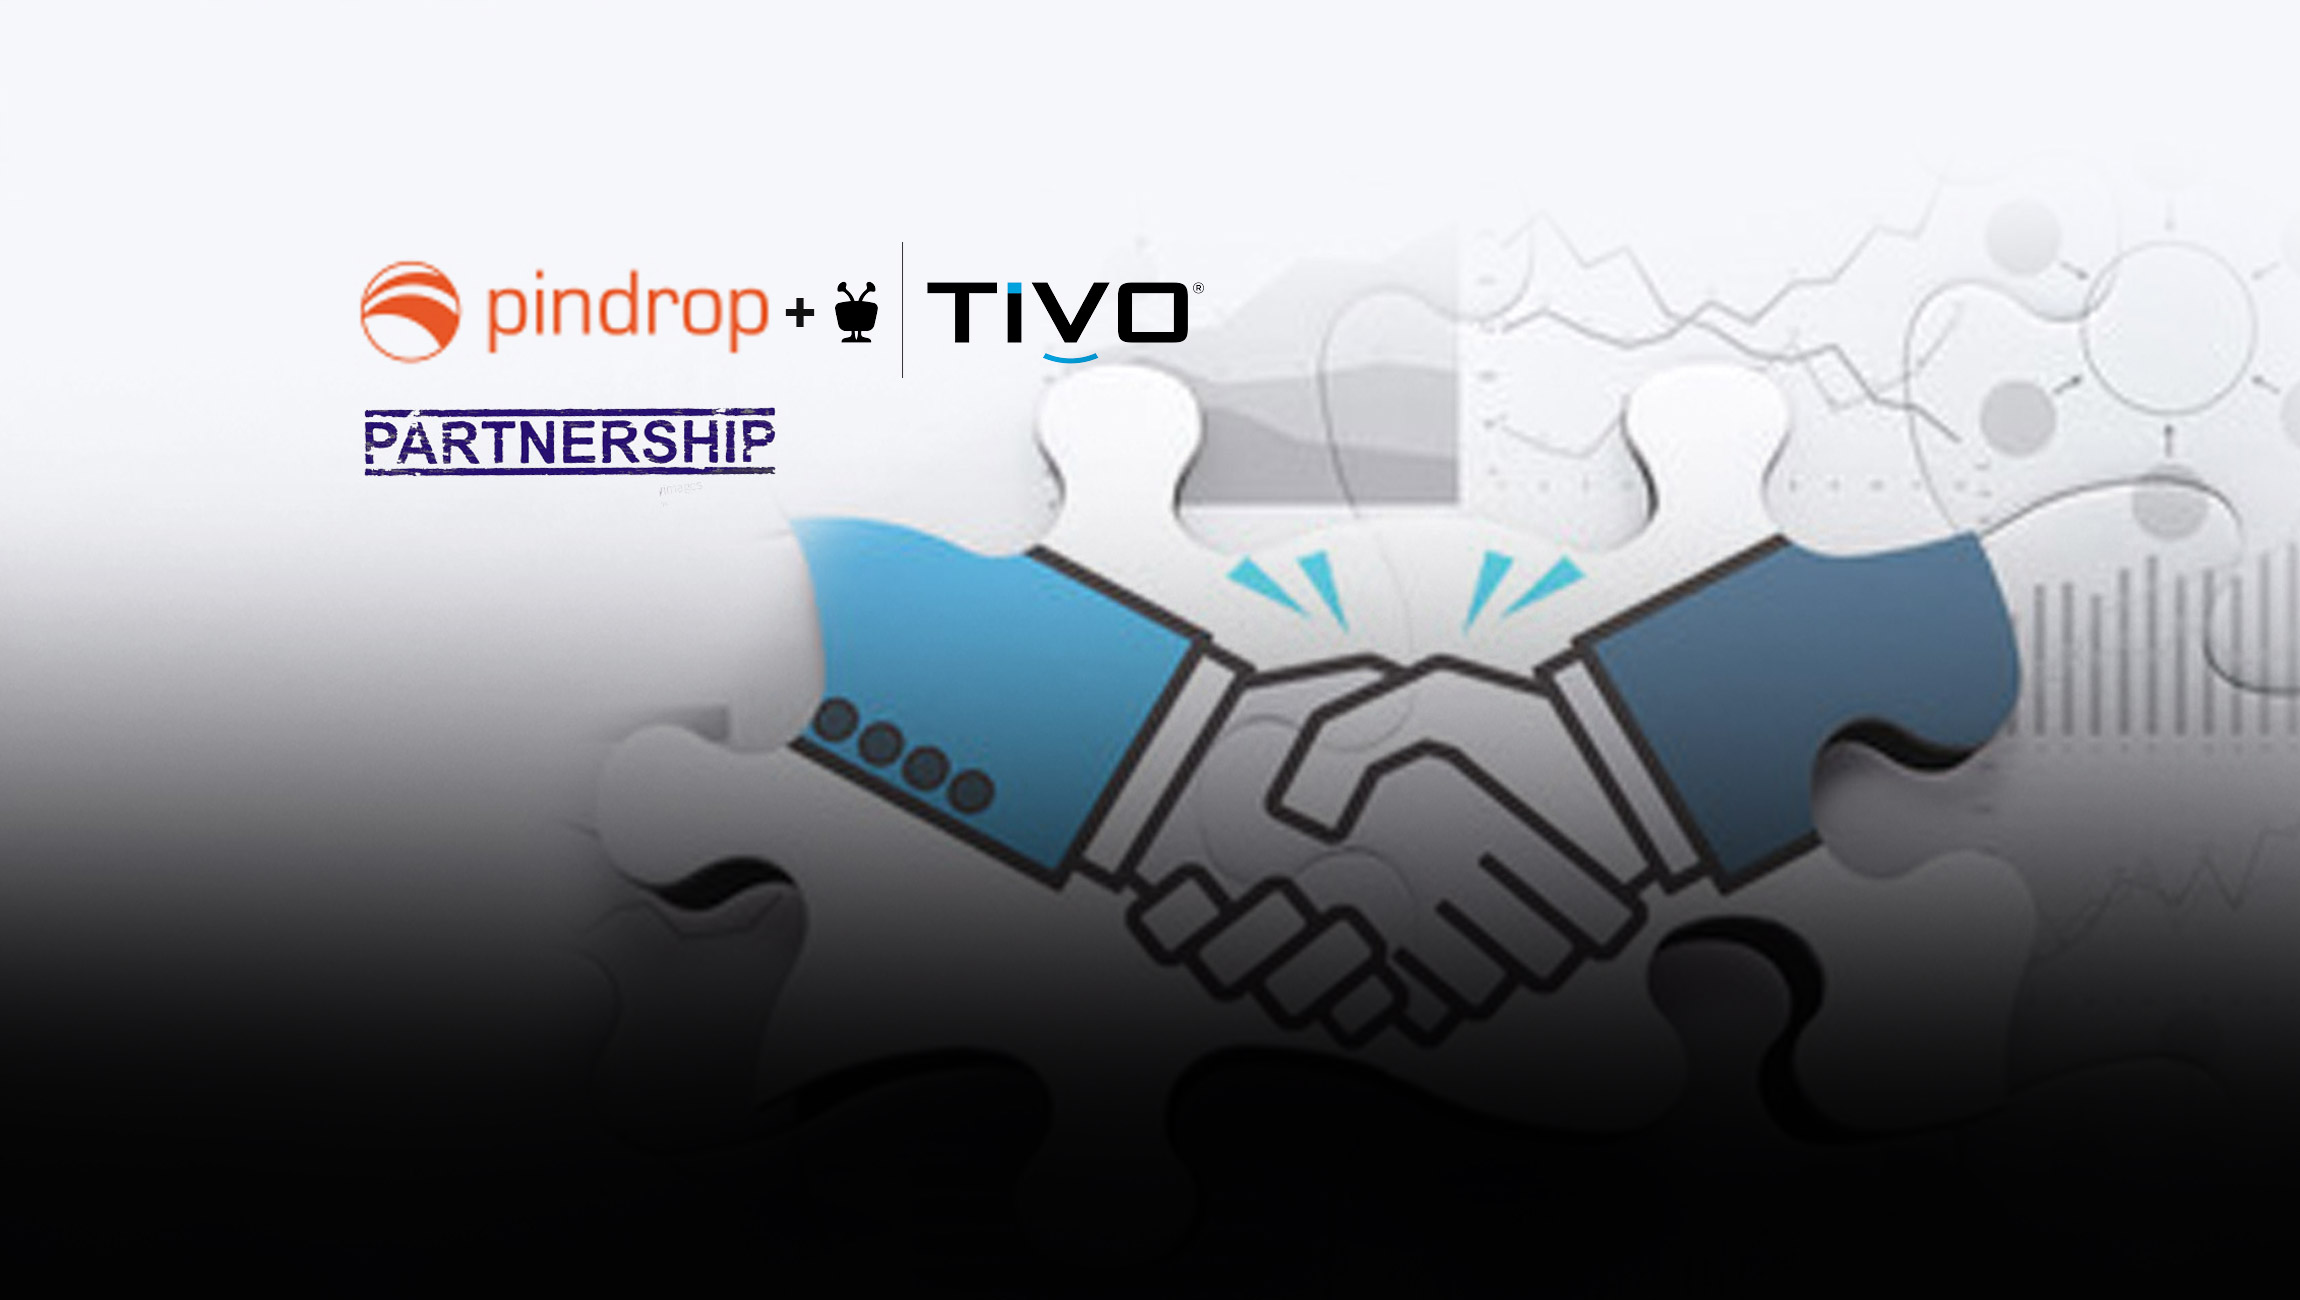 Pindrop and TiVo Partner, Simplifying Video Streaming Content Discovery with Voice Enabled Personalization